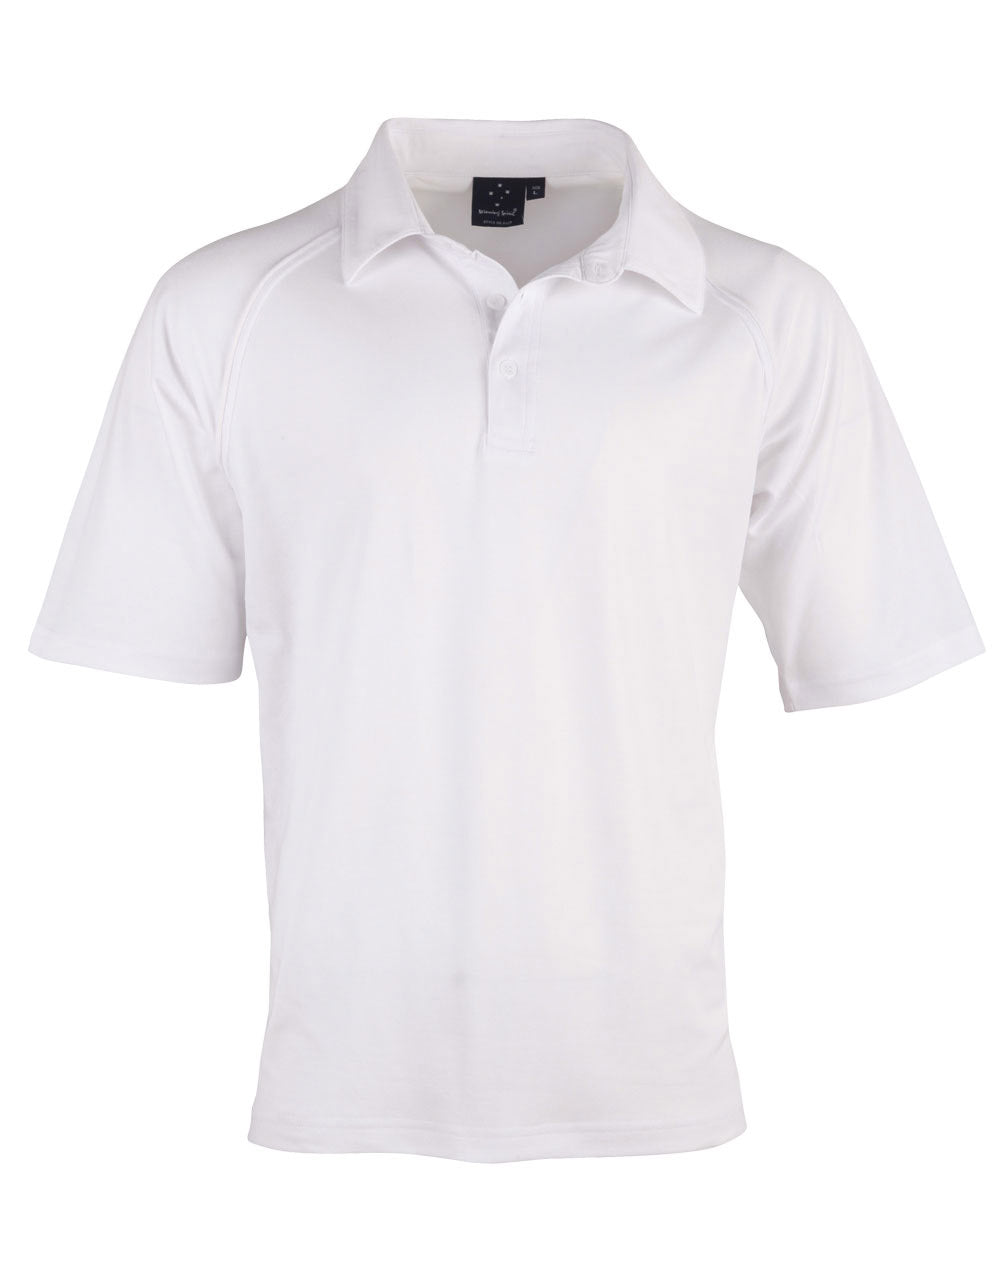 [PS29K] Children's Cooldry S/S polo